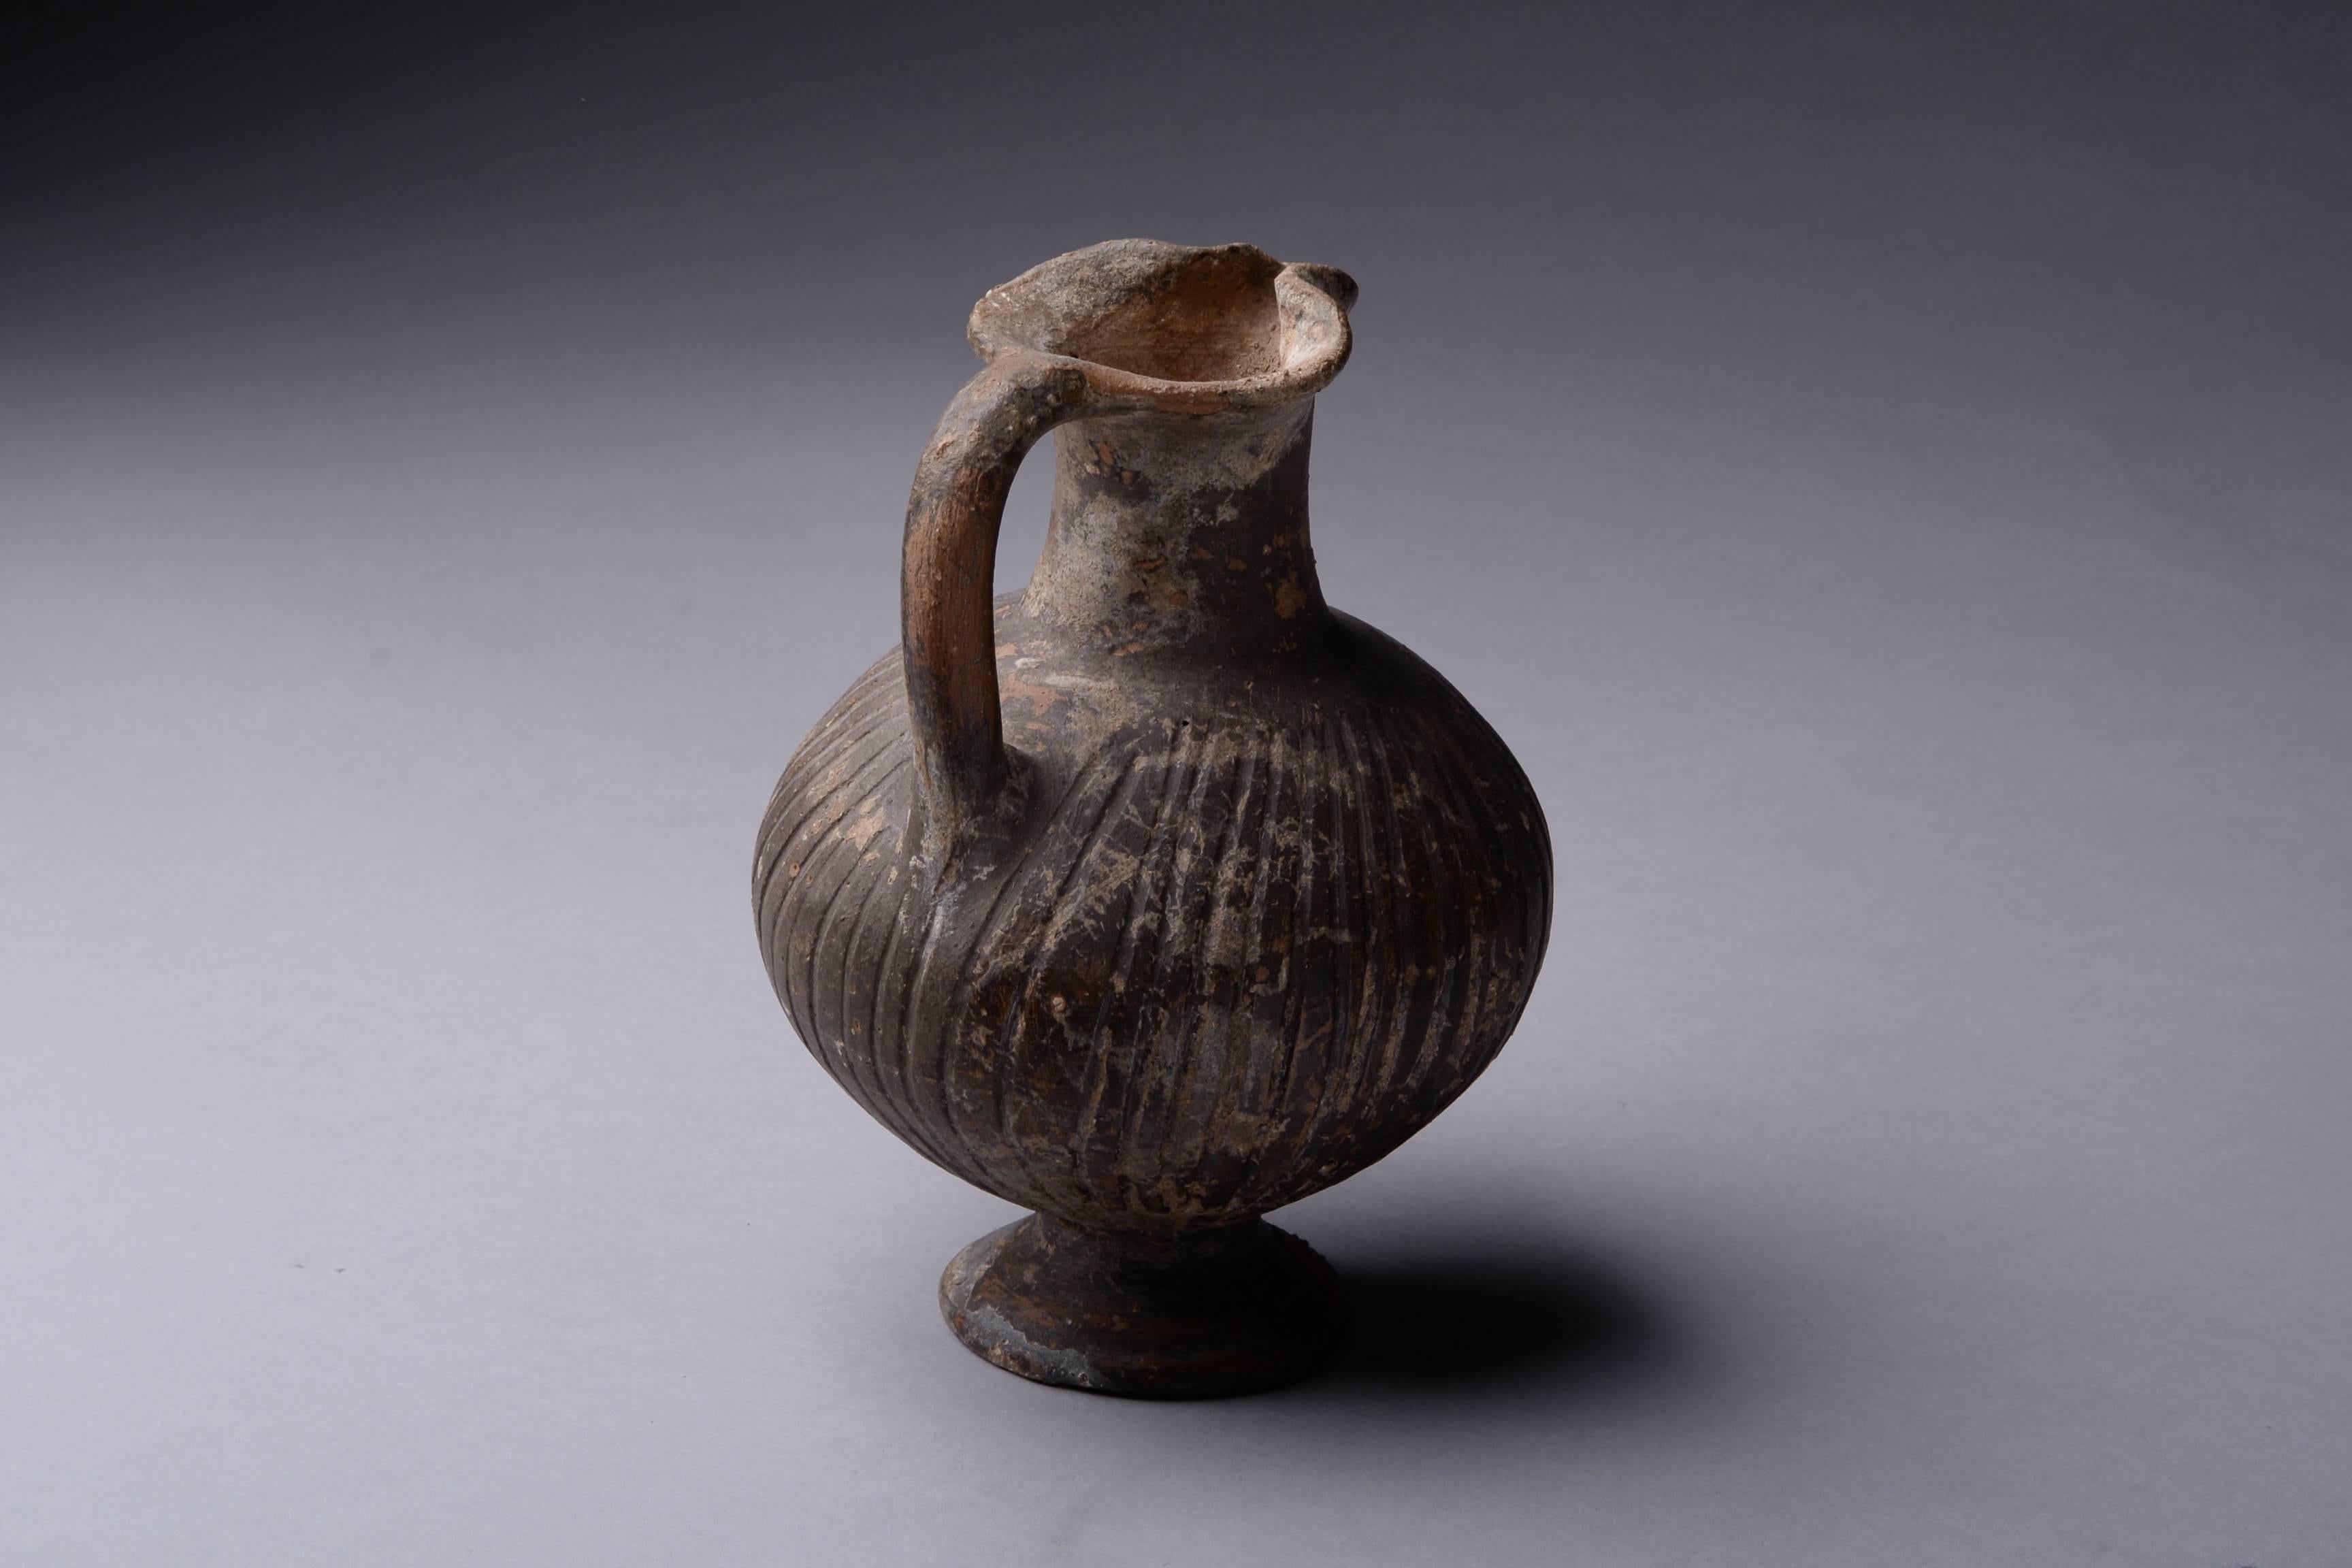 A fine example of an ancient Cypro-Geometric black slip ware jug, dating to circa 950-800 BC. These characteristically Cypriot vessels are sometimes referred to as black slip ware jugs. They are characterized by the globular body with grooves,